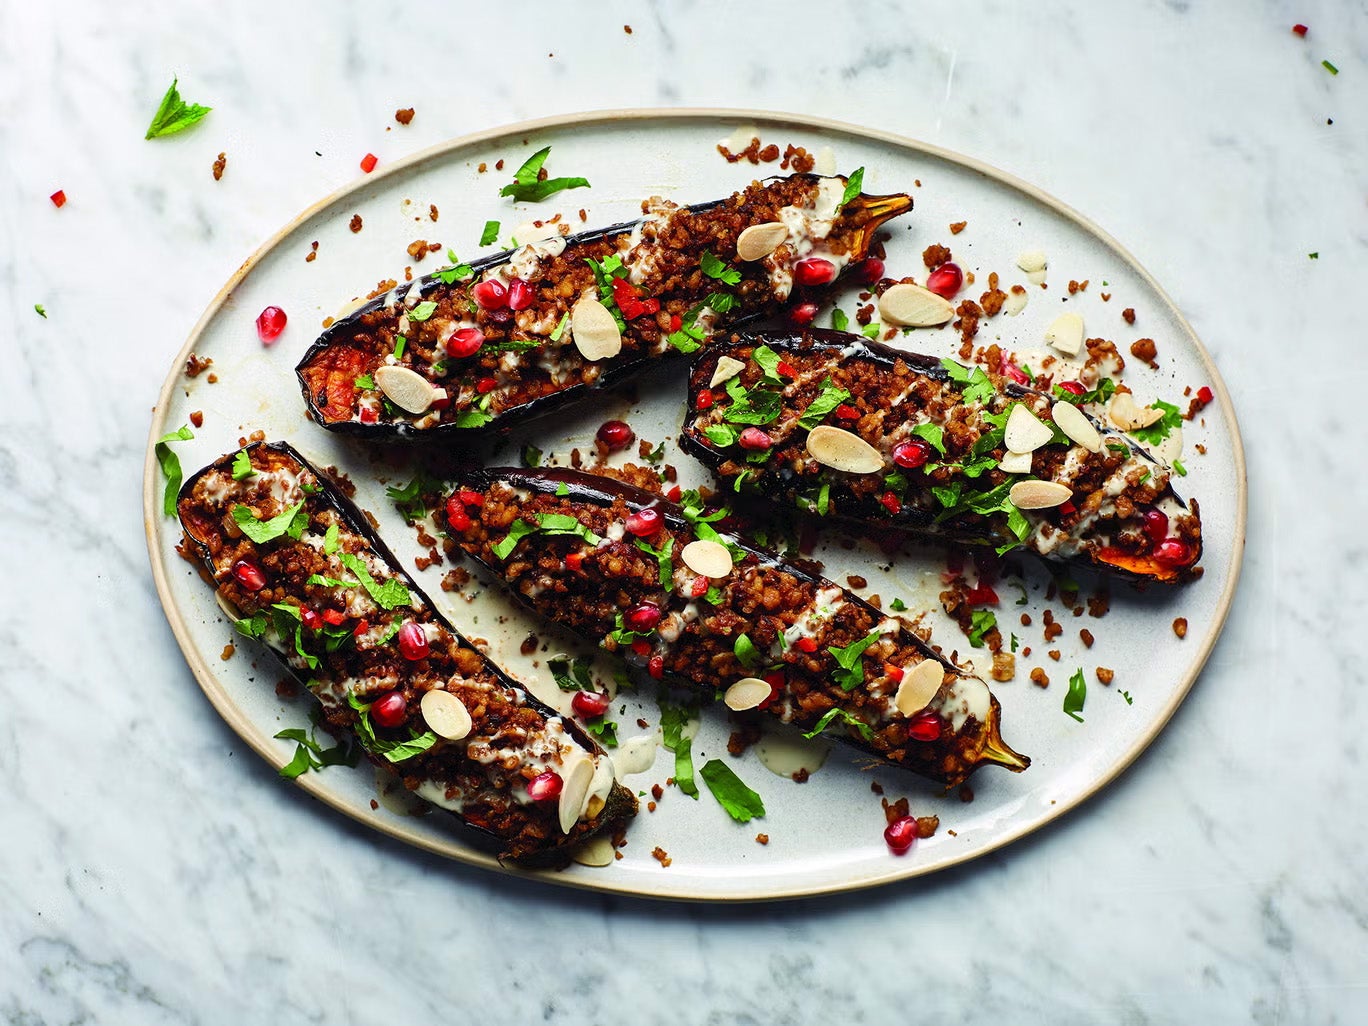 This spicy stuffed aubergine recipe comes packed with flavour – and a fascinating backstory